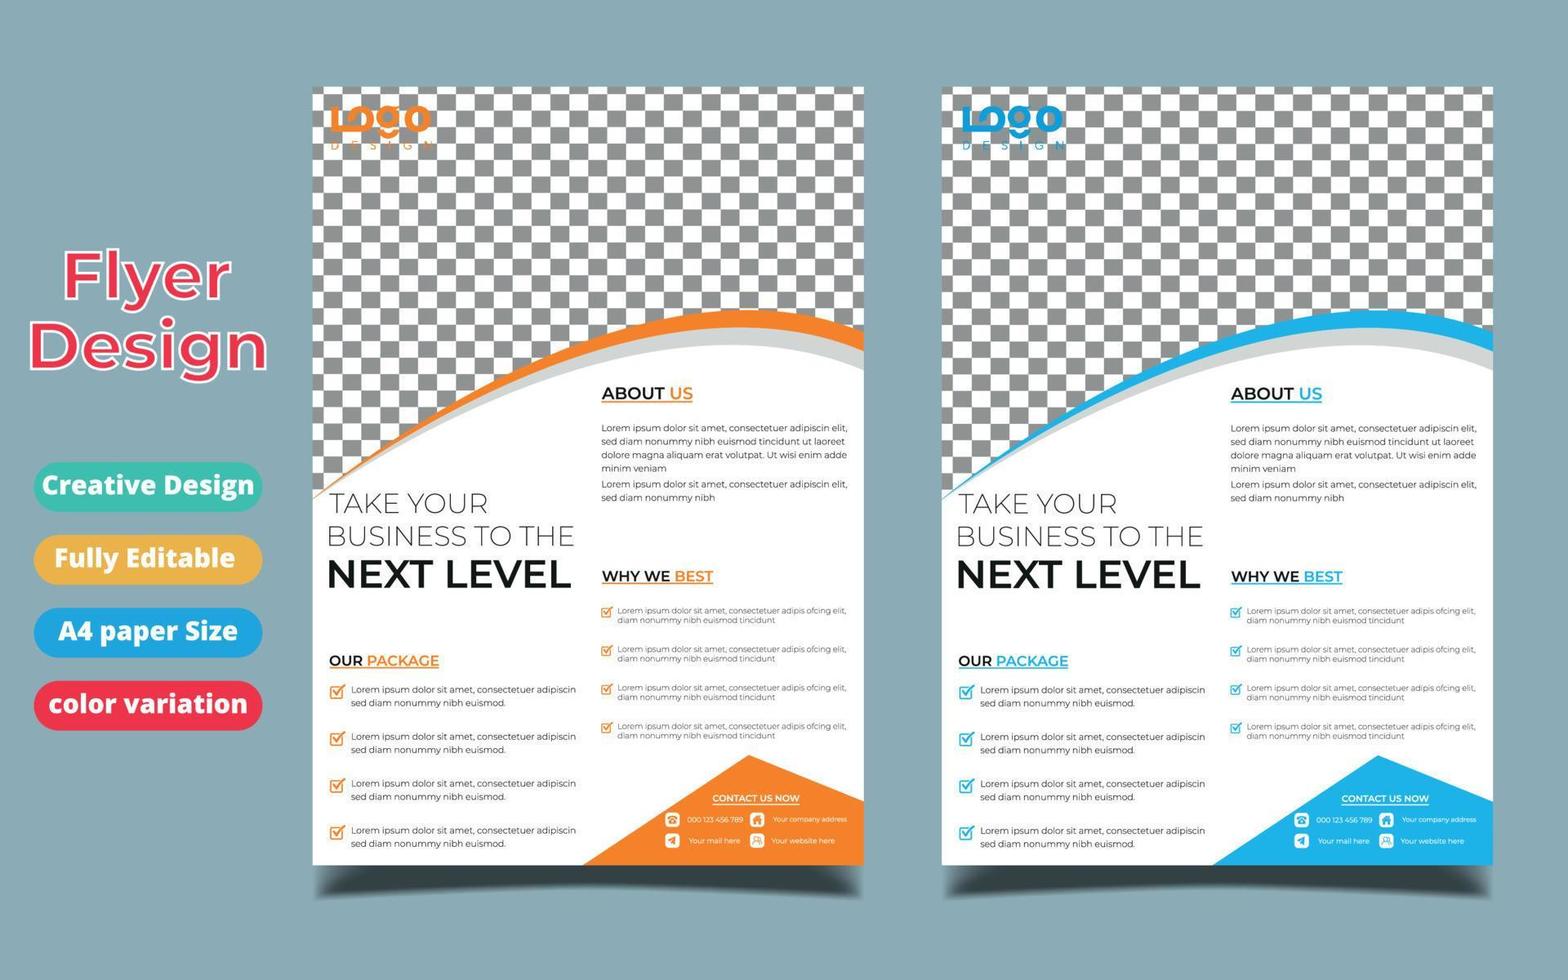 Flyer design. Business brochure template. Annual report cover. Booklet for education, advertisement, presentation, magazine page. a4 size vector illustration. Blue color